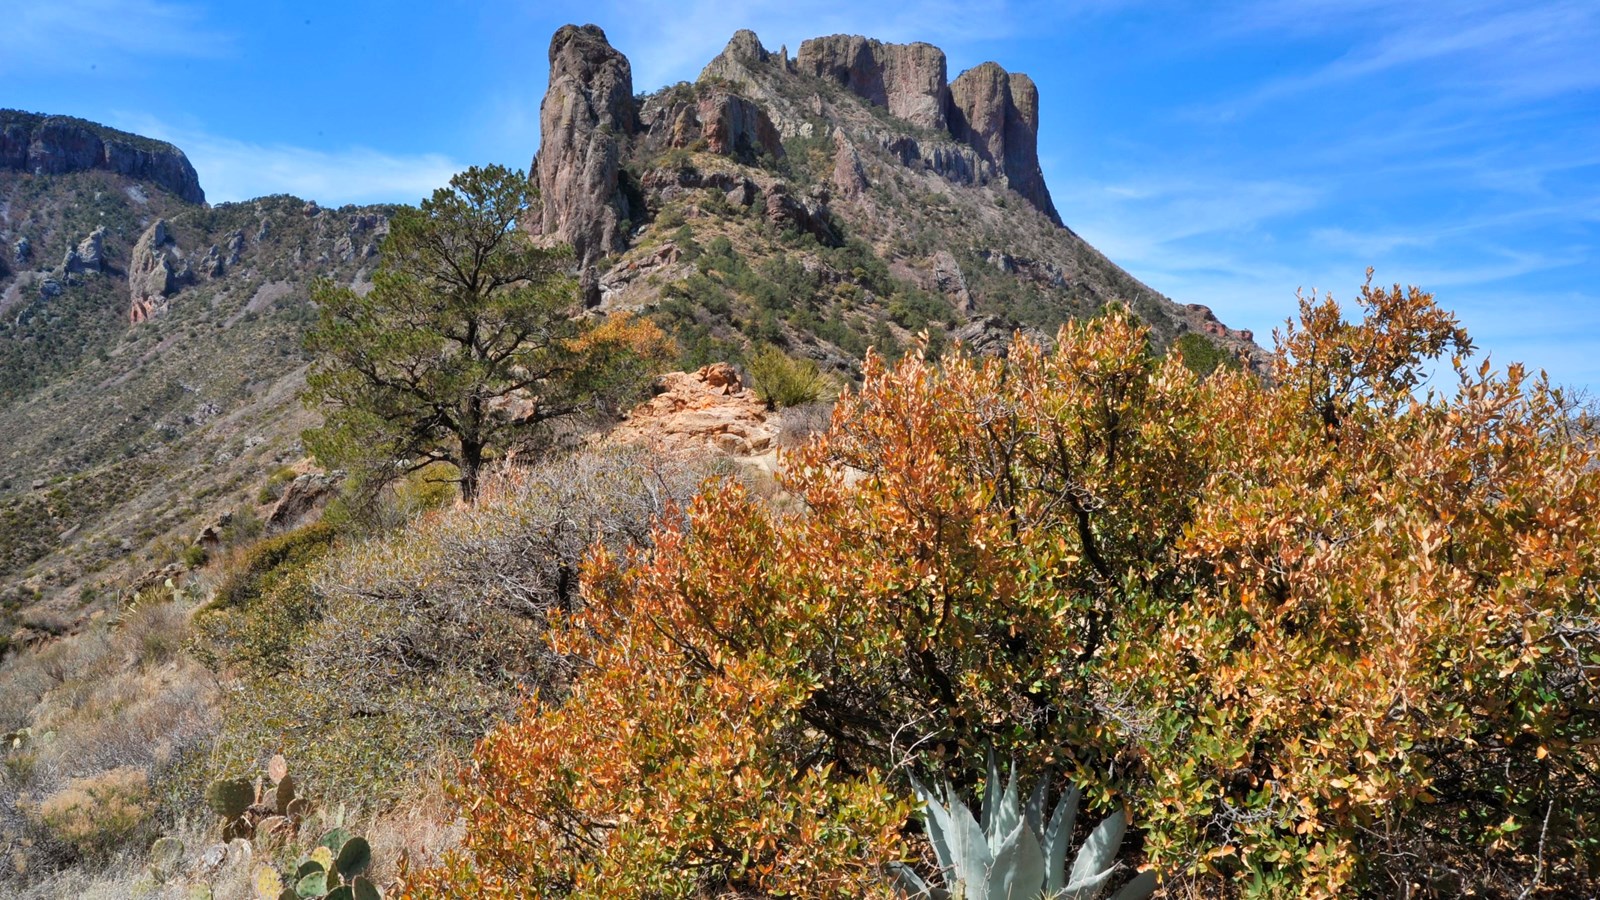 A mountainside with desert plants and trees with a tall rocky peak in the background